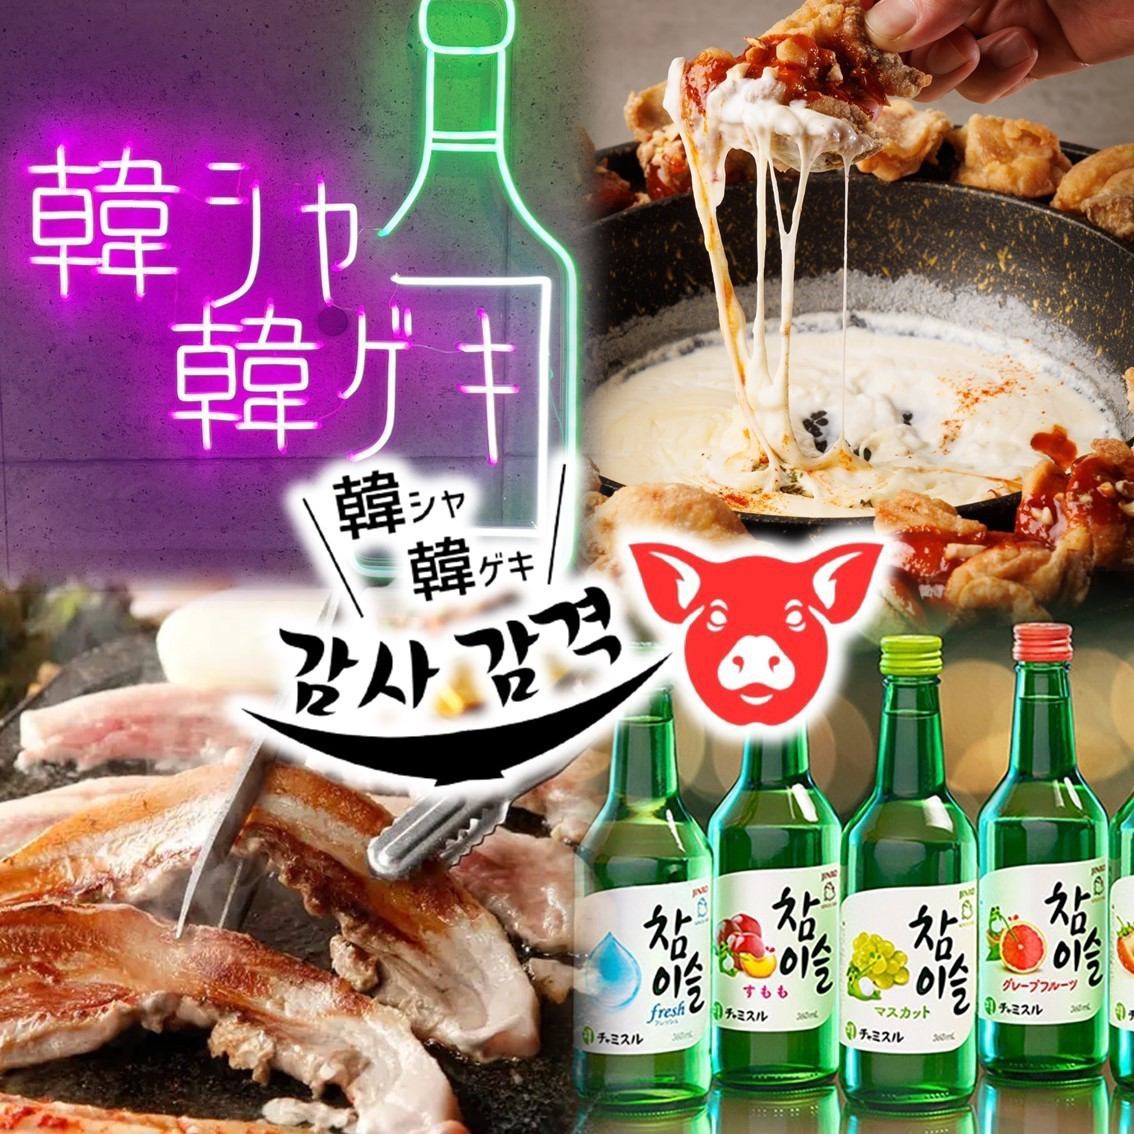 Open from 14:00 on Saturdays, Sundays, and holidays!! This Korean restaurant is perfect for lunchtime drinks♪